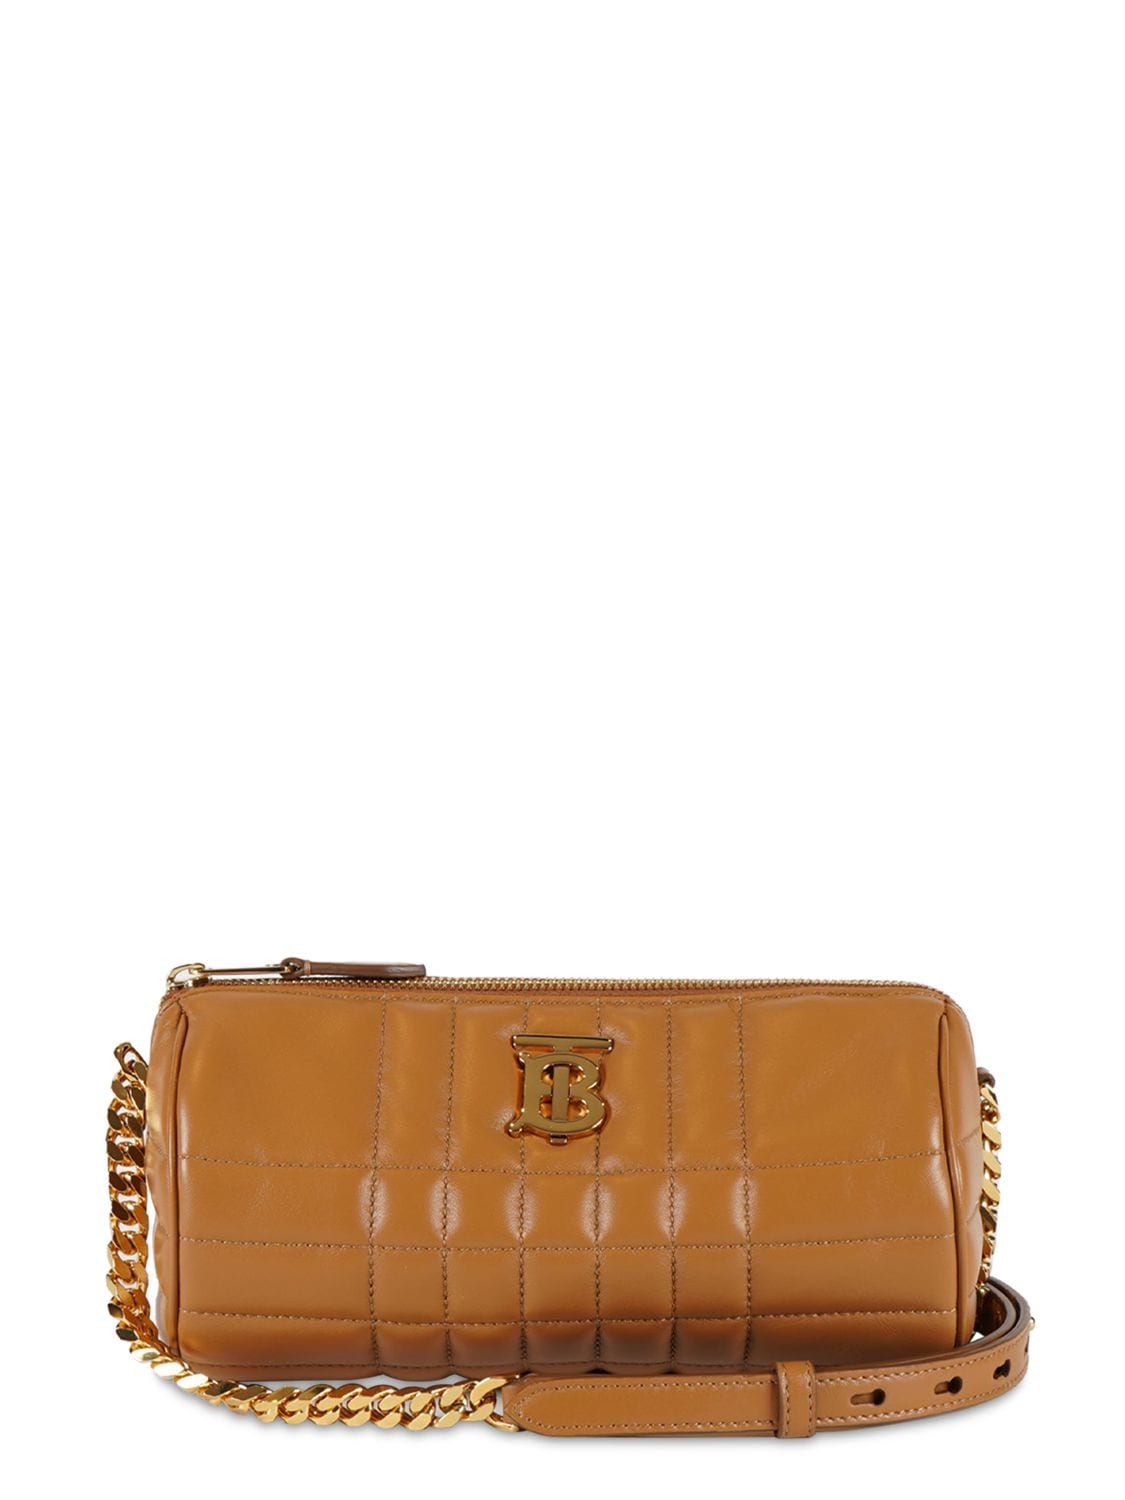 Burberry Lola Check Quilted Leather Barrel Crossbody Bag In Marple ...